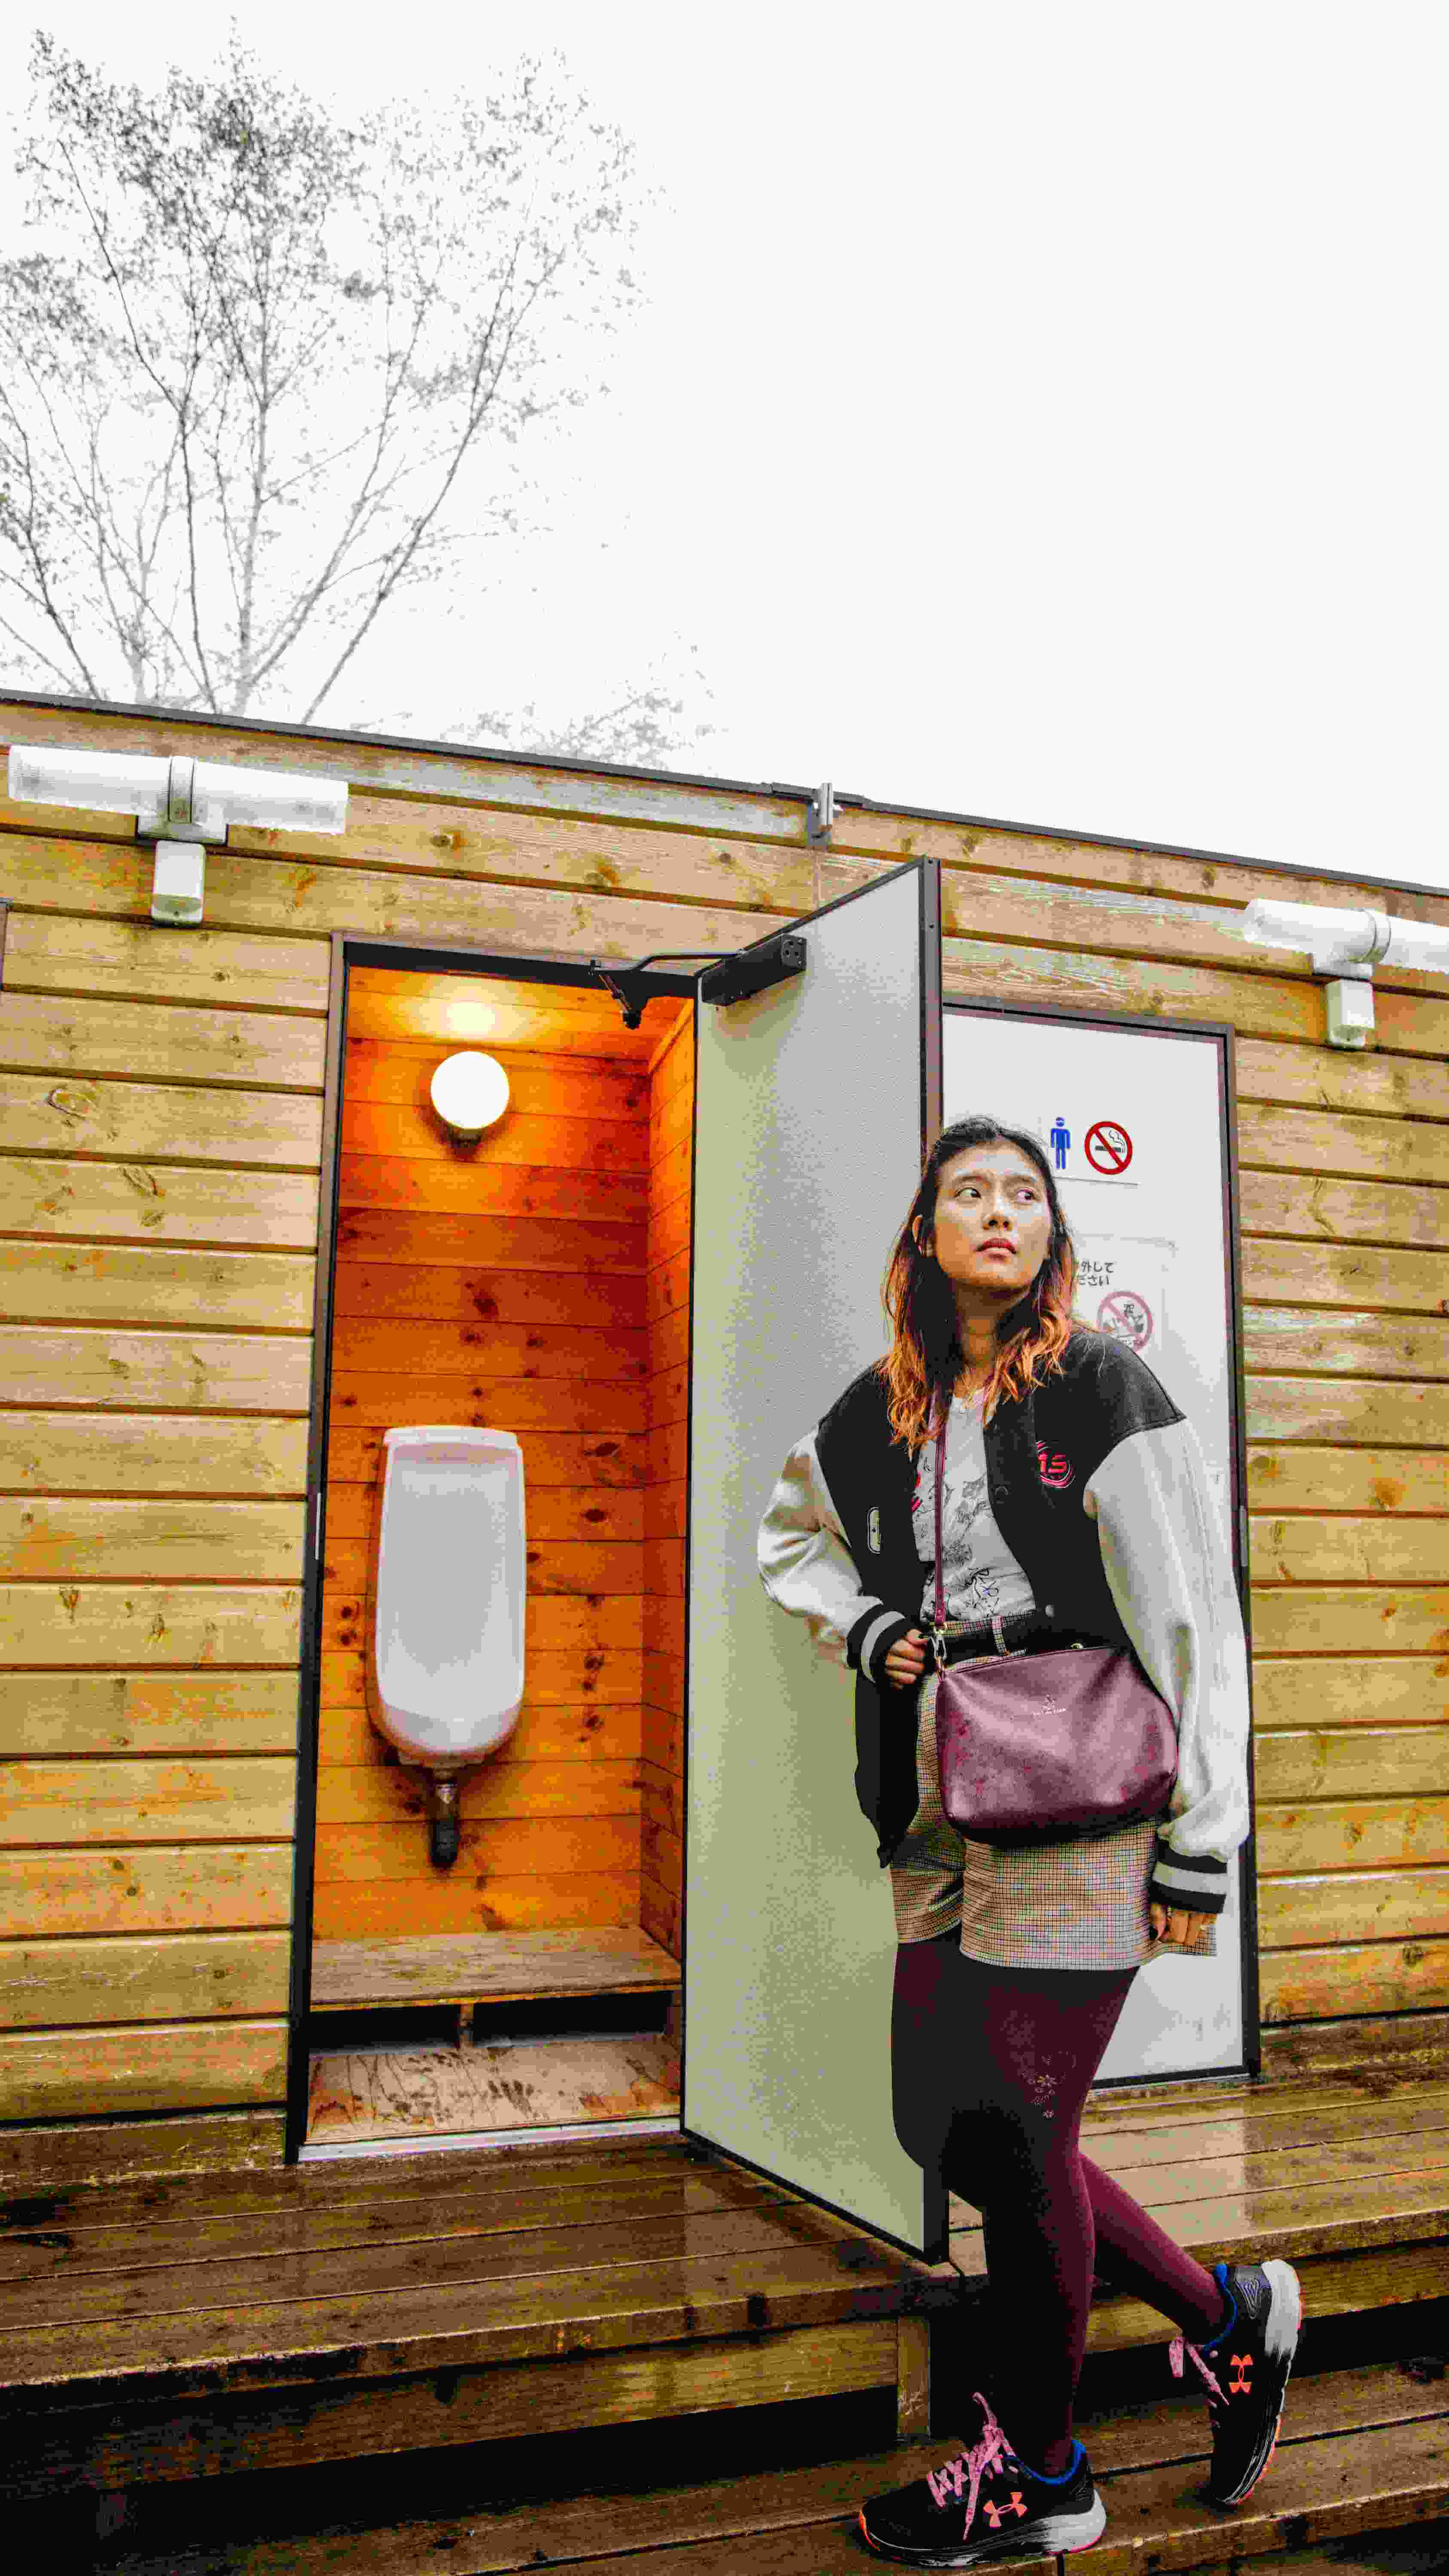 Picture of woman standing next to DAIO International Bio-Toilet urinal.